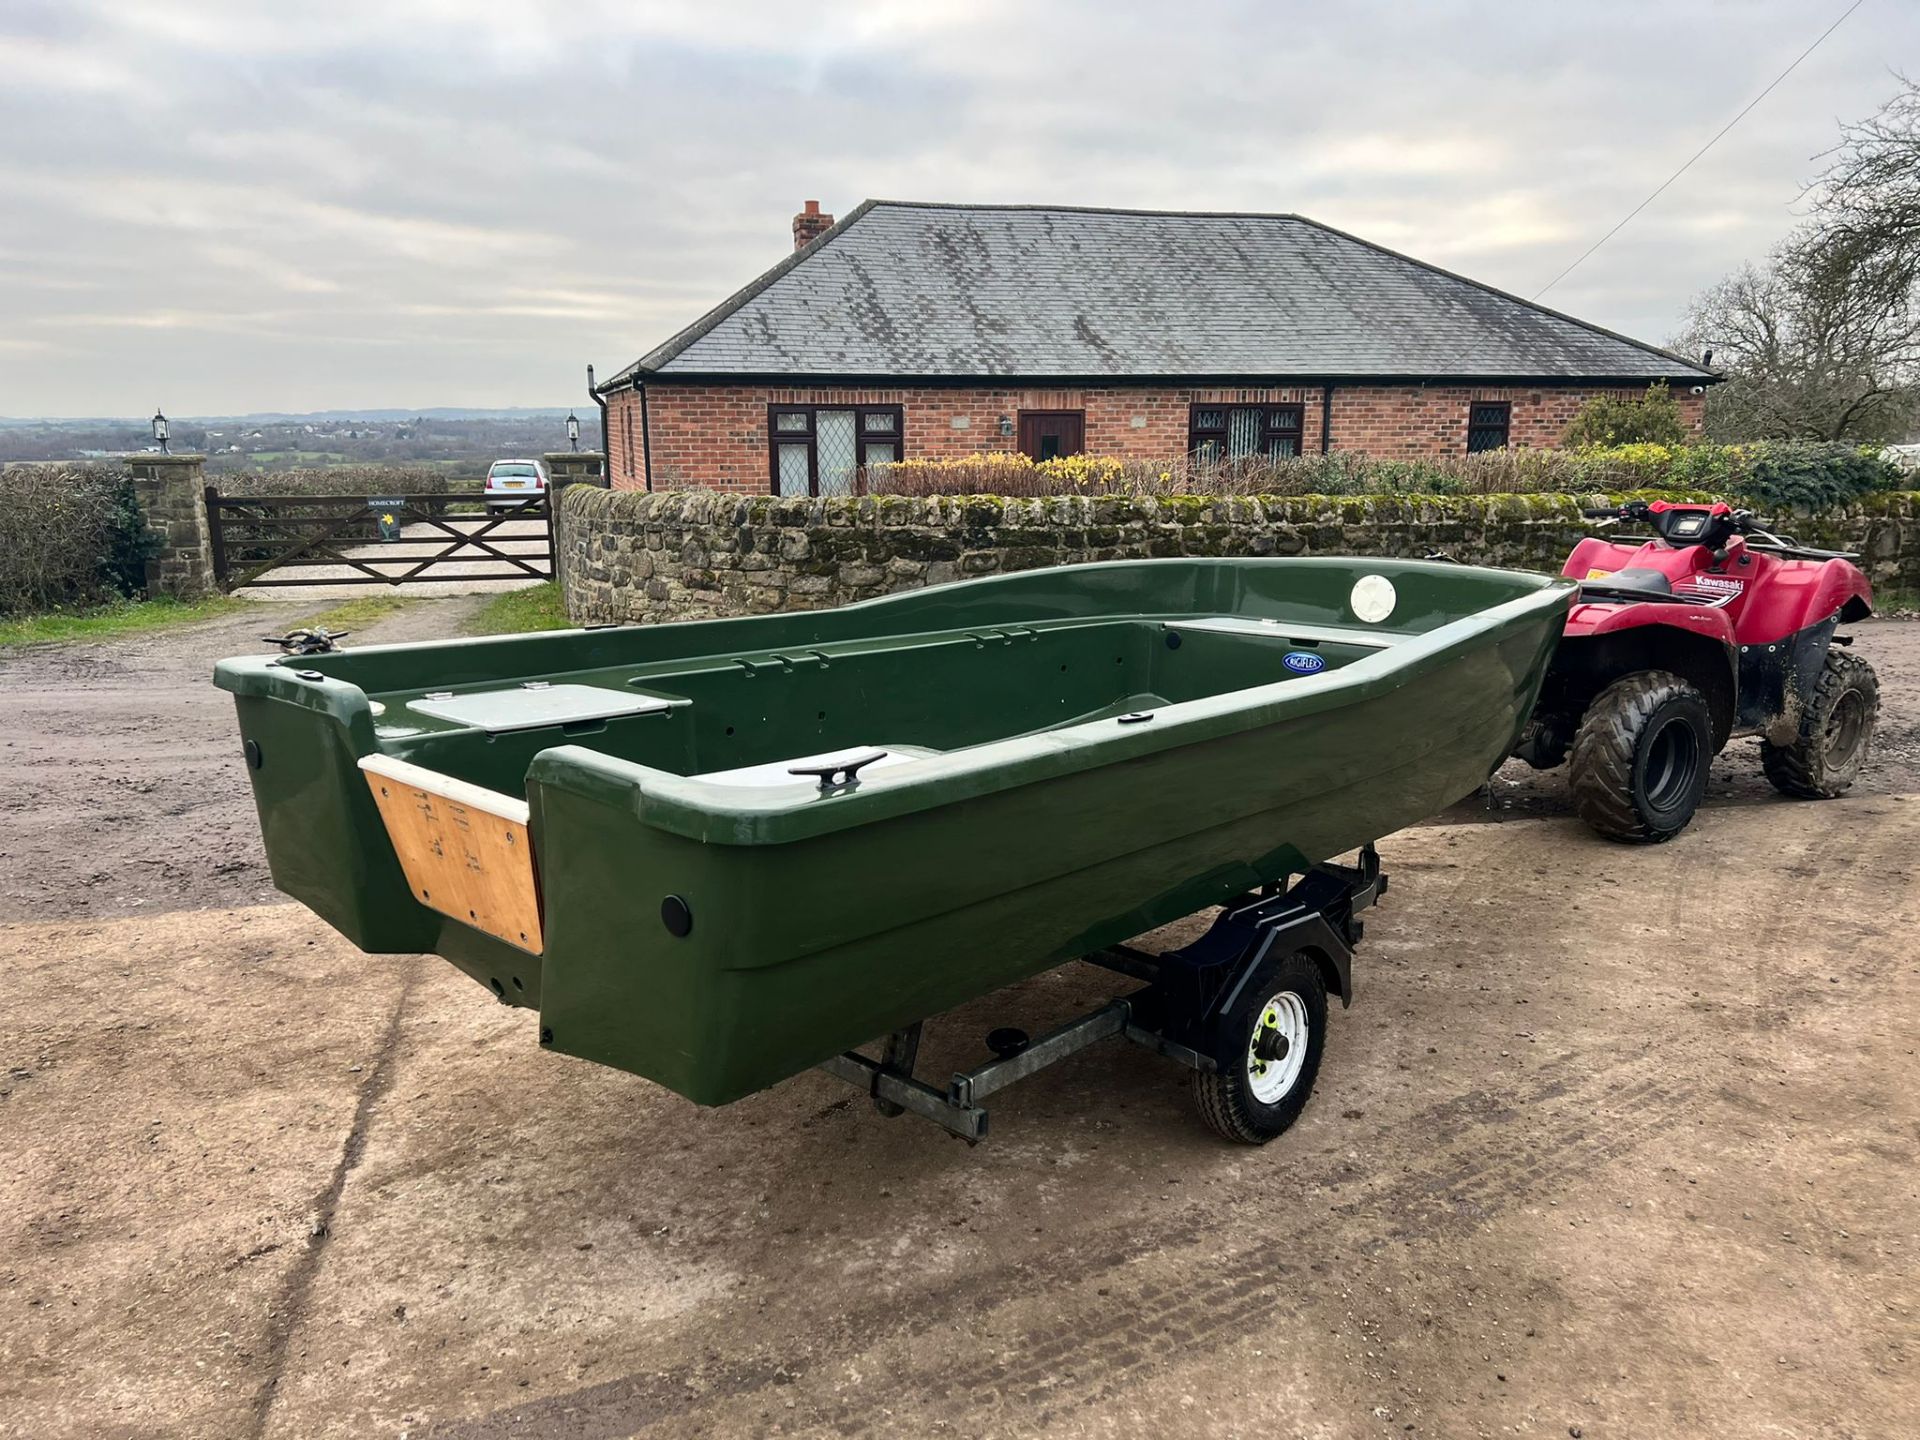 RIGFLEX AQUAPECHE 370 BOAT ON INDESPENSION MERIT SINGLE AXEL SPORT BOAT TRAILER WITH WINCH *PLUS VAT - Image 5 of 13